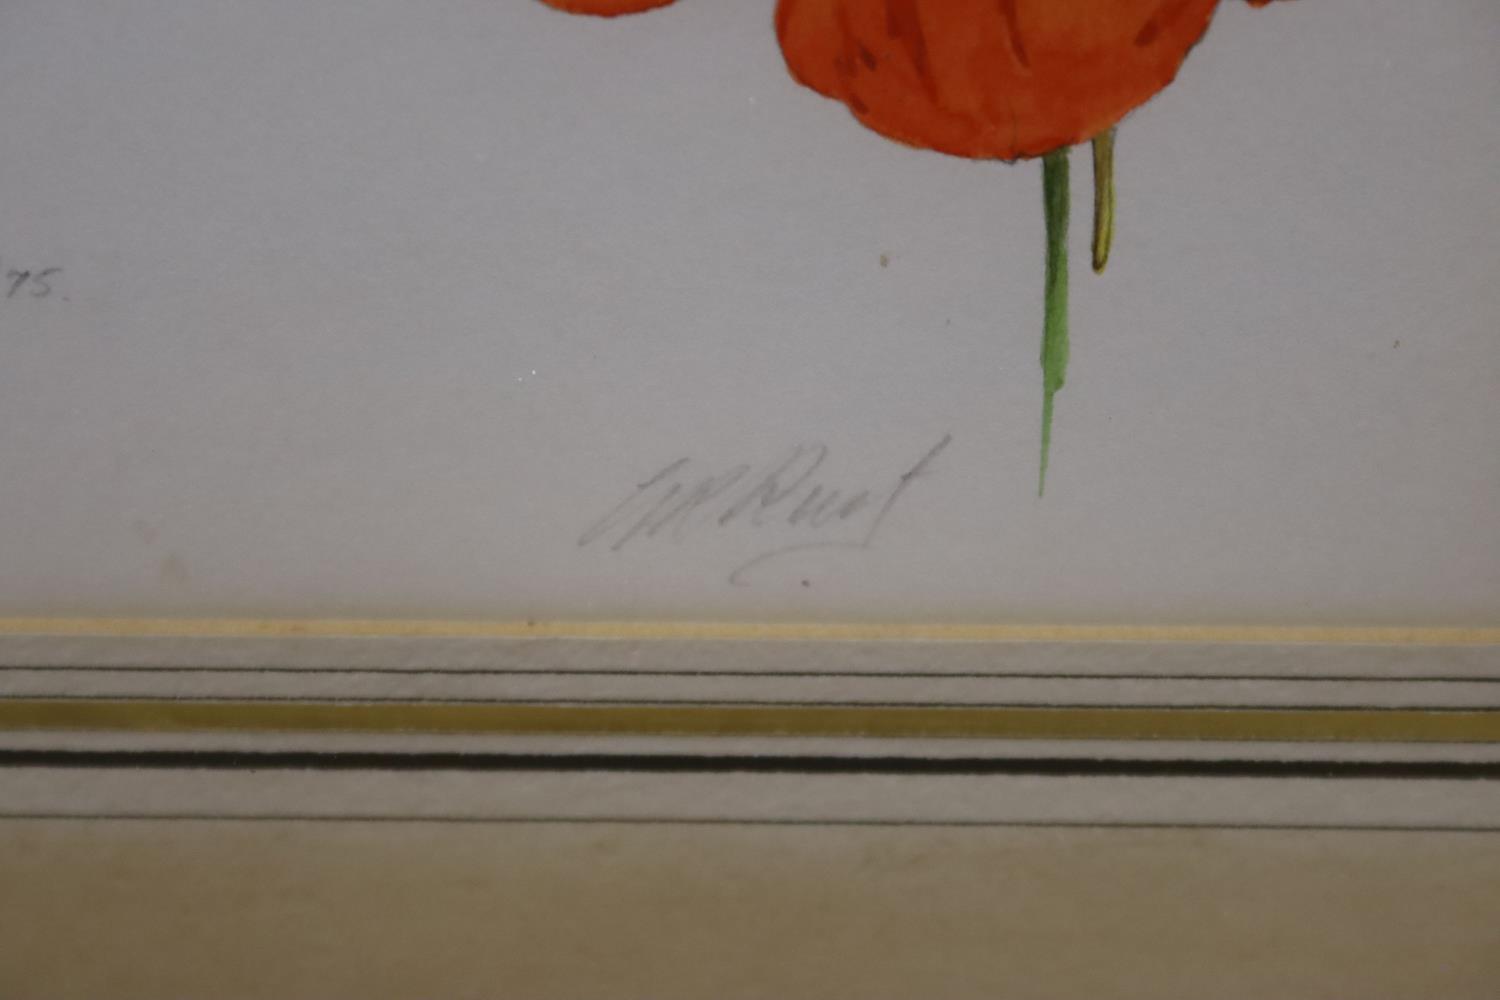 Graham Rust (1942-), pencil and watercolour, Nasturtium, Agra, 7/1/75, signed with Spink label - Image 3 of 5